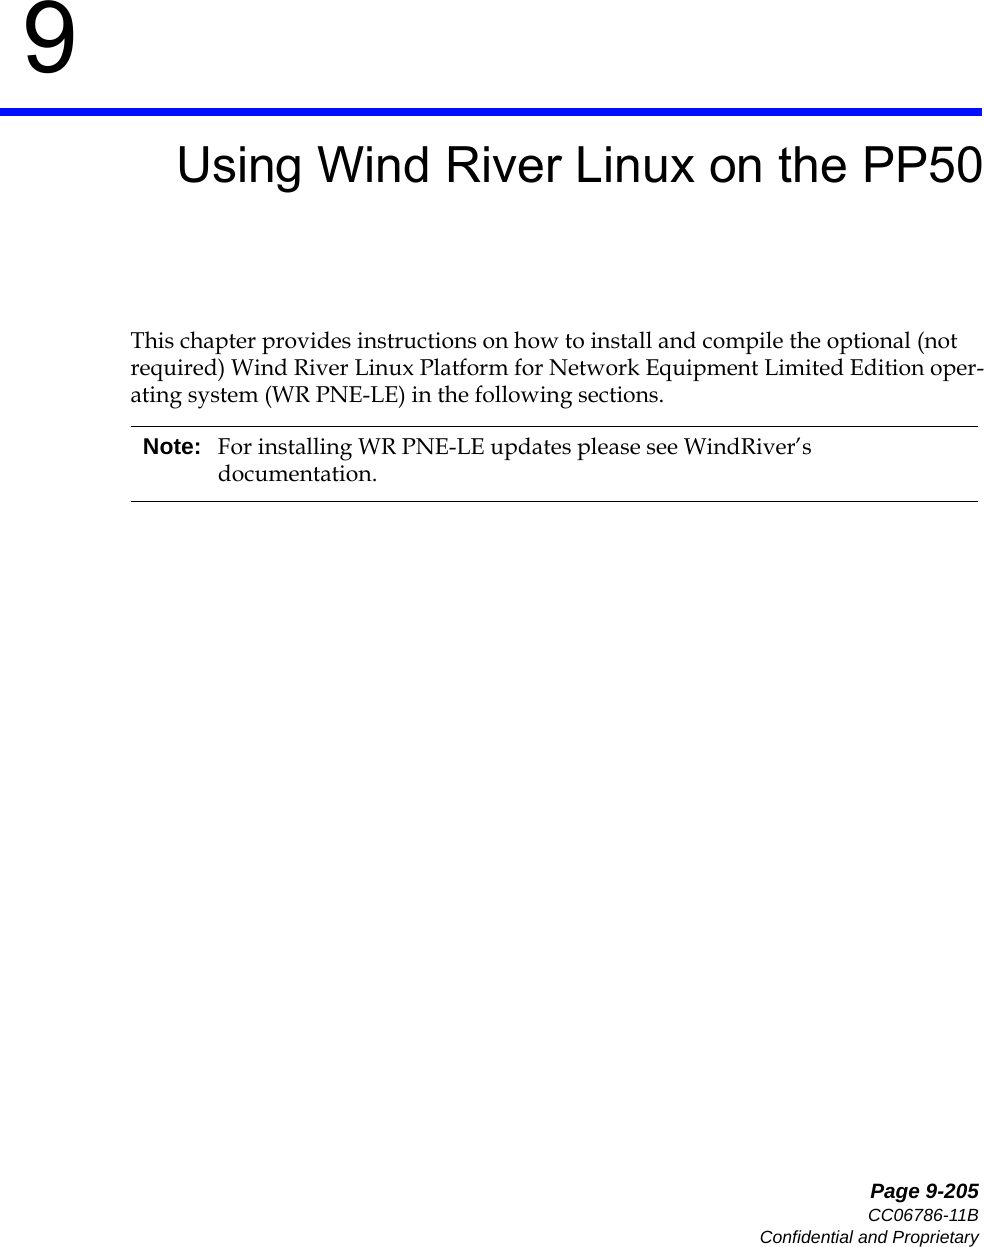   Page 9-205CC06786-11BConfidential and Proprietary9Preliminary9Using Wind River Linux on the PP50This chapter provides instructions on how to install and compile the optional (not required) Wind River Linux Platform for Network Equipment Limited Edition oper-ating system (WR PNE-LE) in the following sections.Note: For installing WR PNE-LE updates please see WindRiver’s documentation.